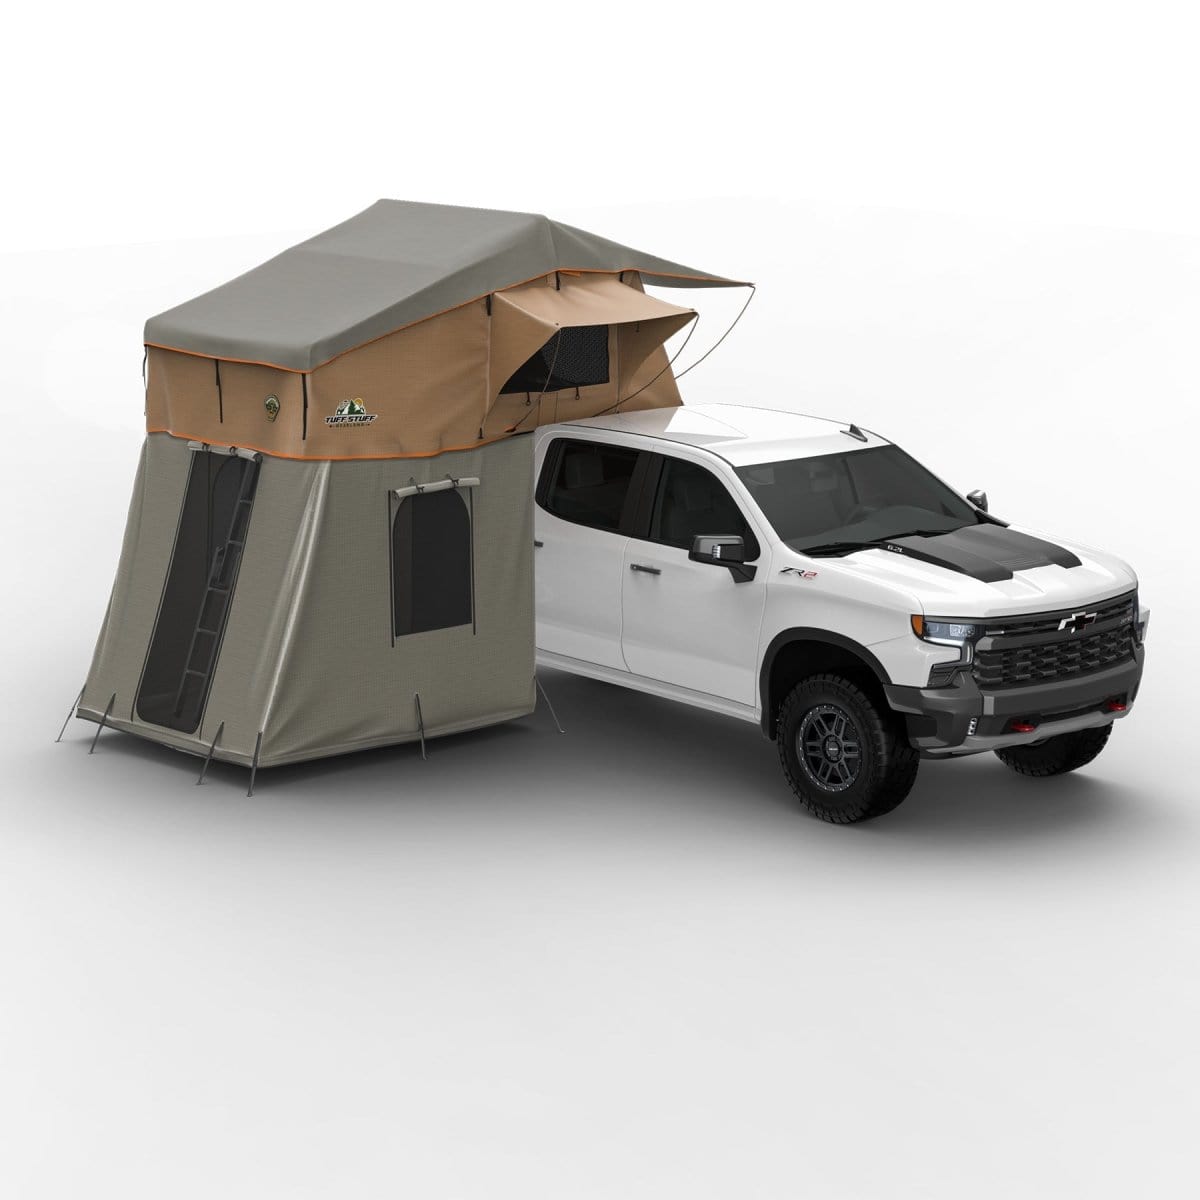 Tuff Stuff Overland Roof Top Tent With Annex Trailhead Rooftop Tent from Tuff Stuff Overland